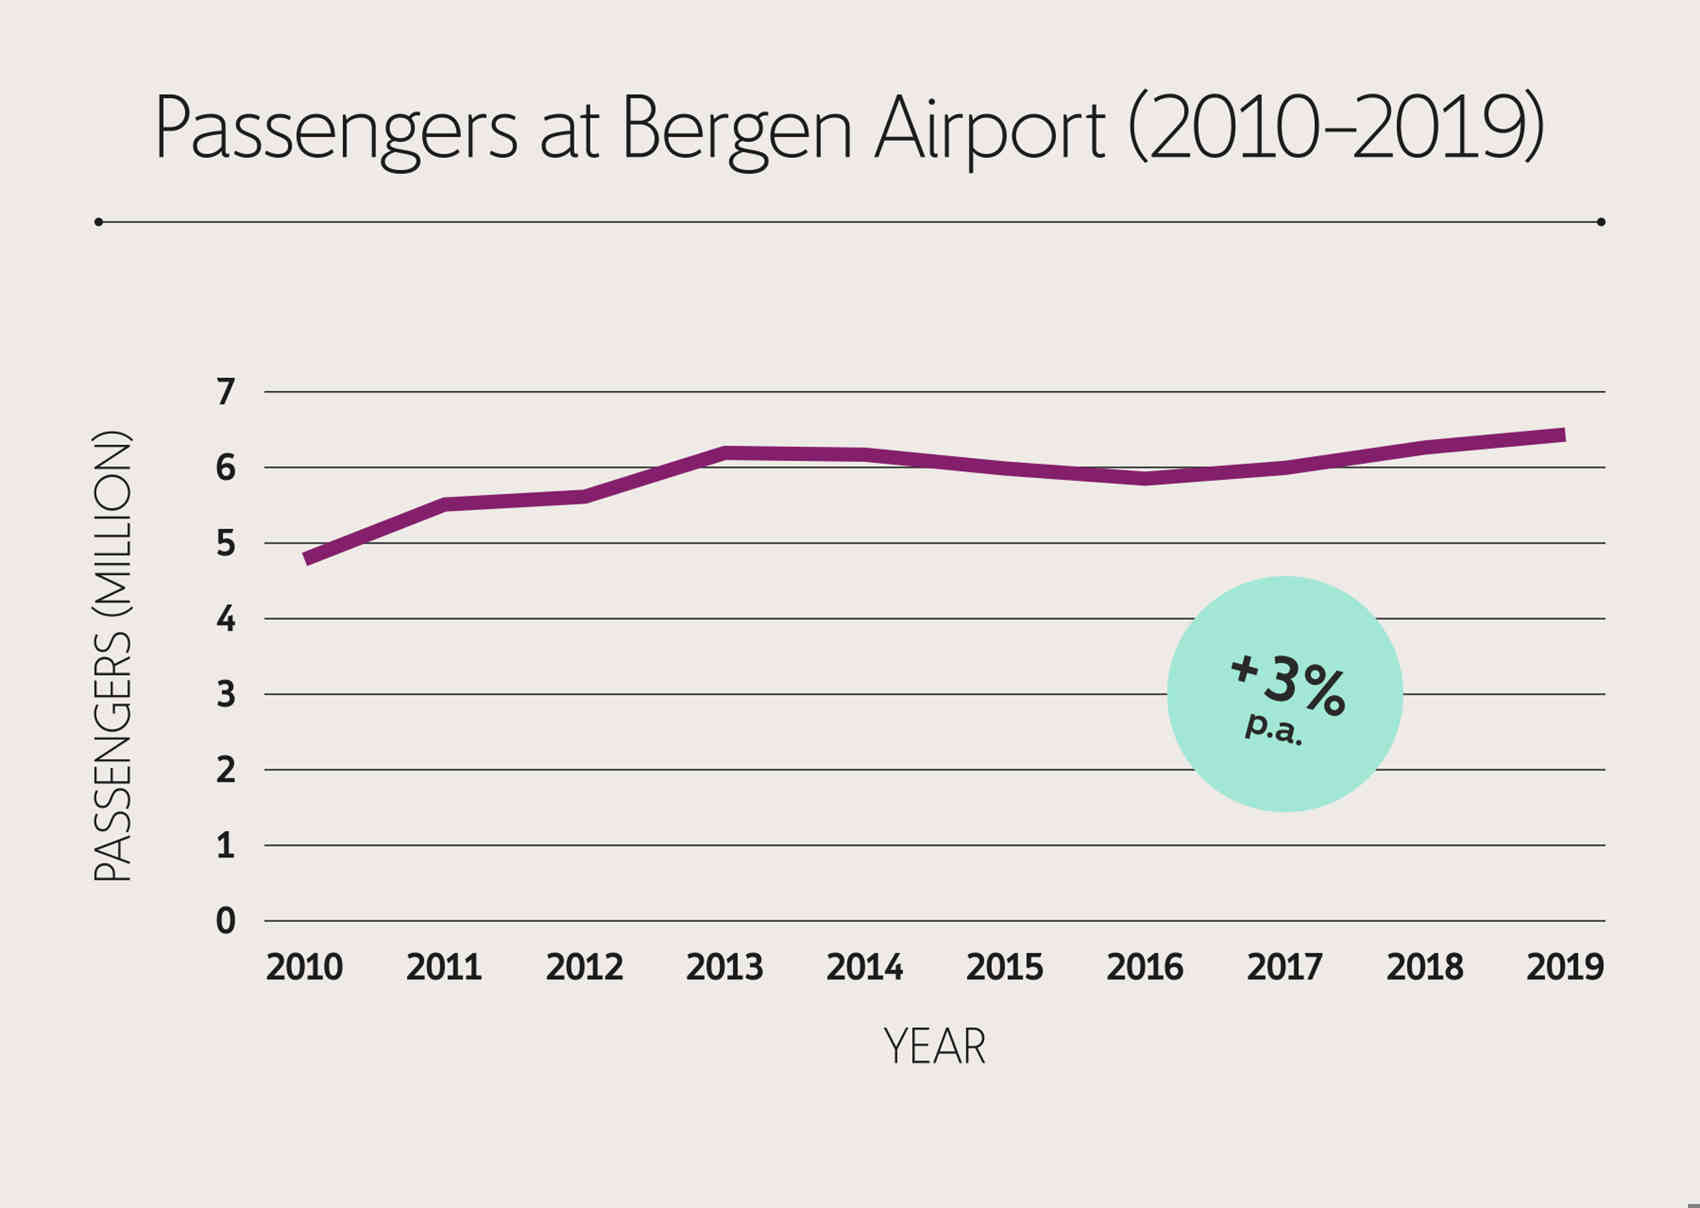 Passenger numbers at Bergen airport have risen from 4.8 mill. in 2010 to 6.2 mill. in 2019, which means an increase of 3%.